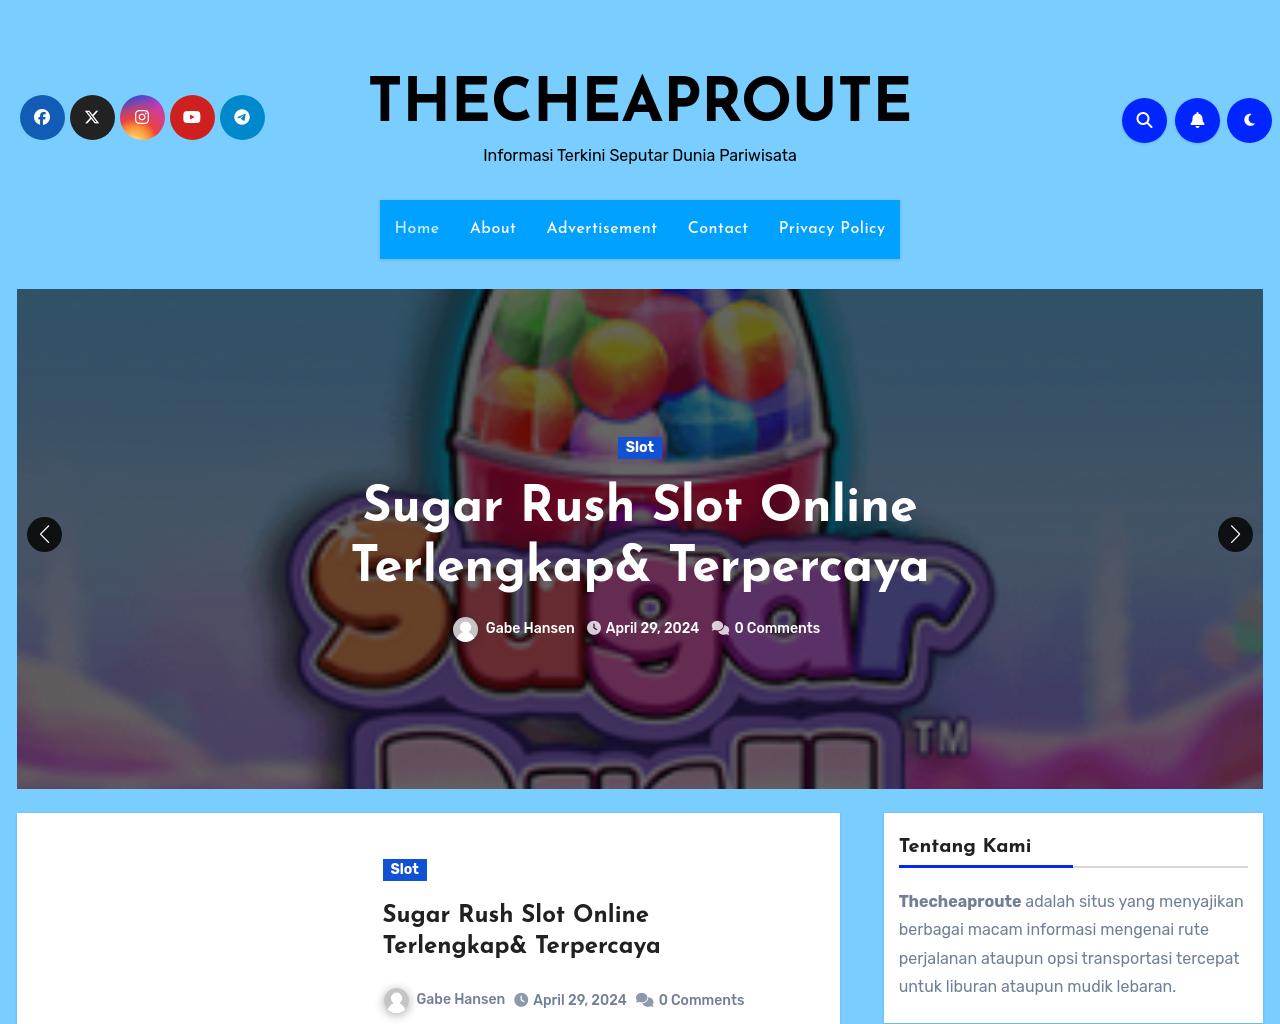 thecheaproute.com